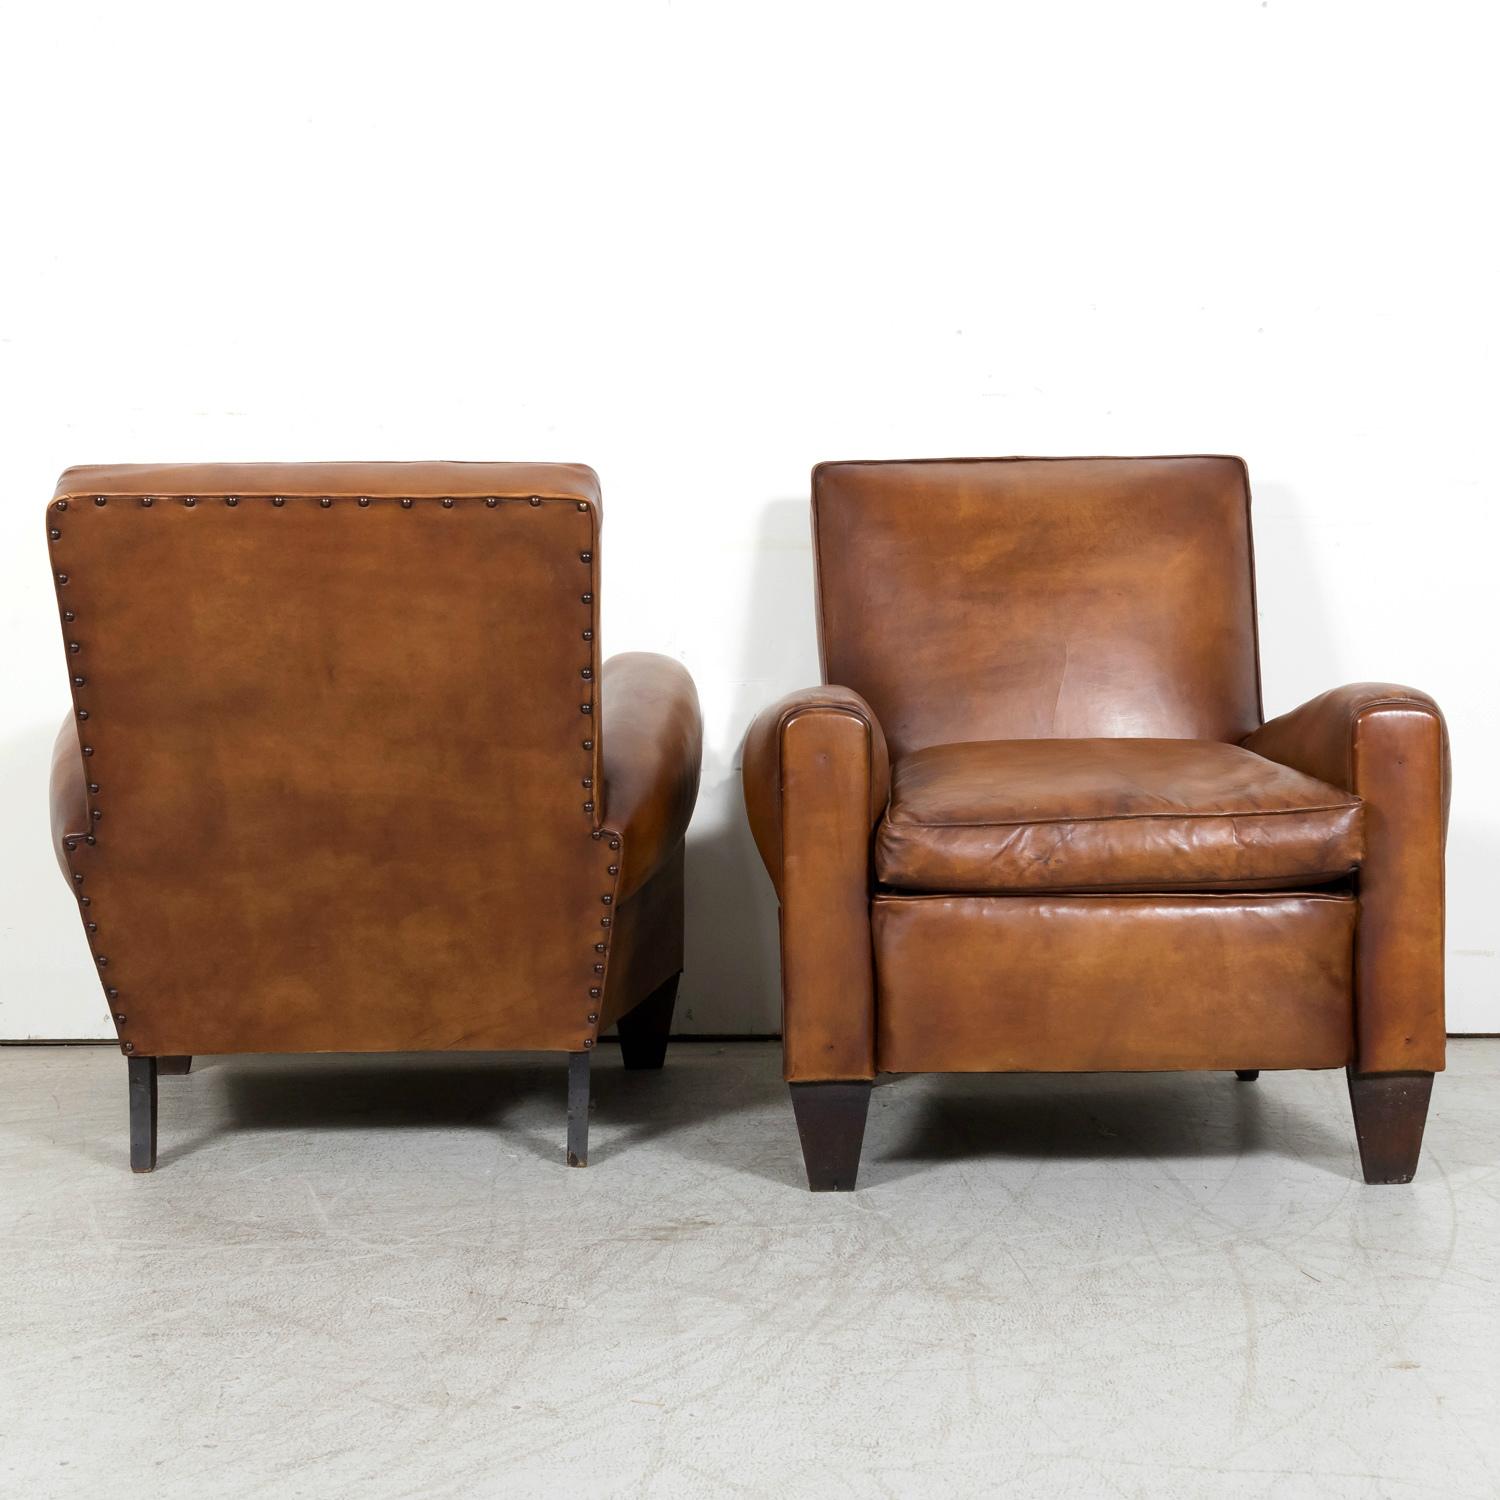 1930s Pair of French Art Deco Period Cognac Leather Club Chairs 1